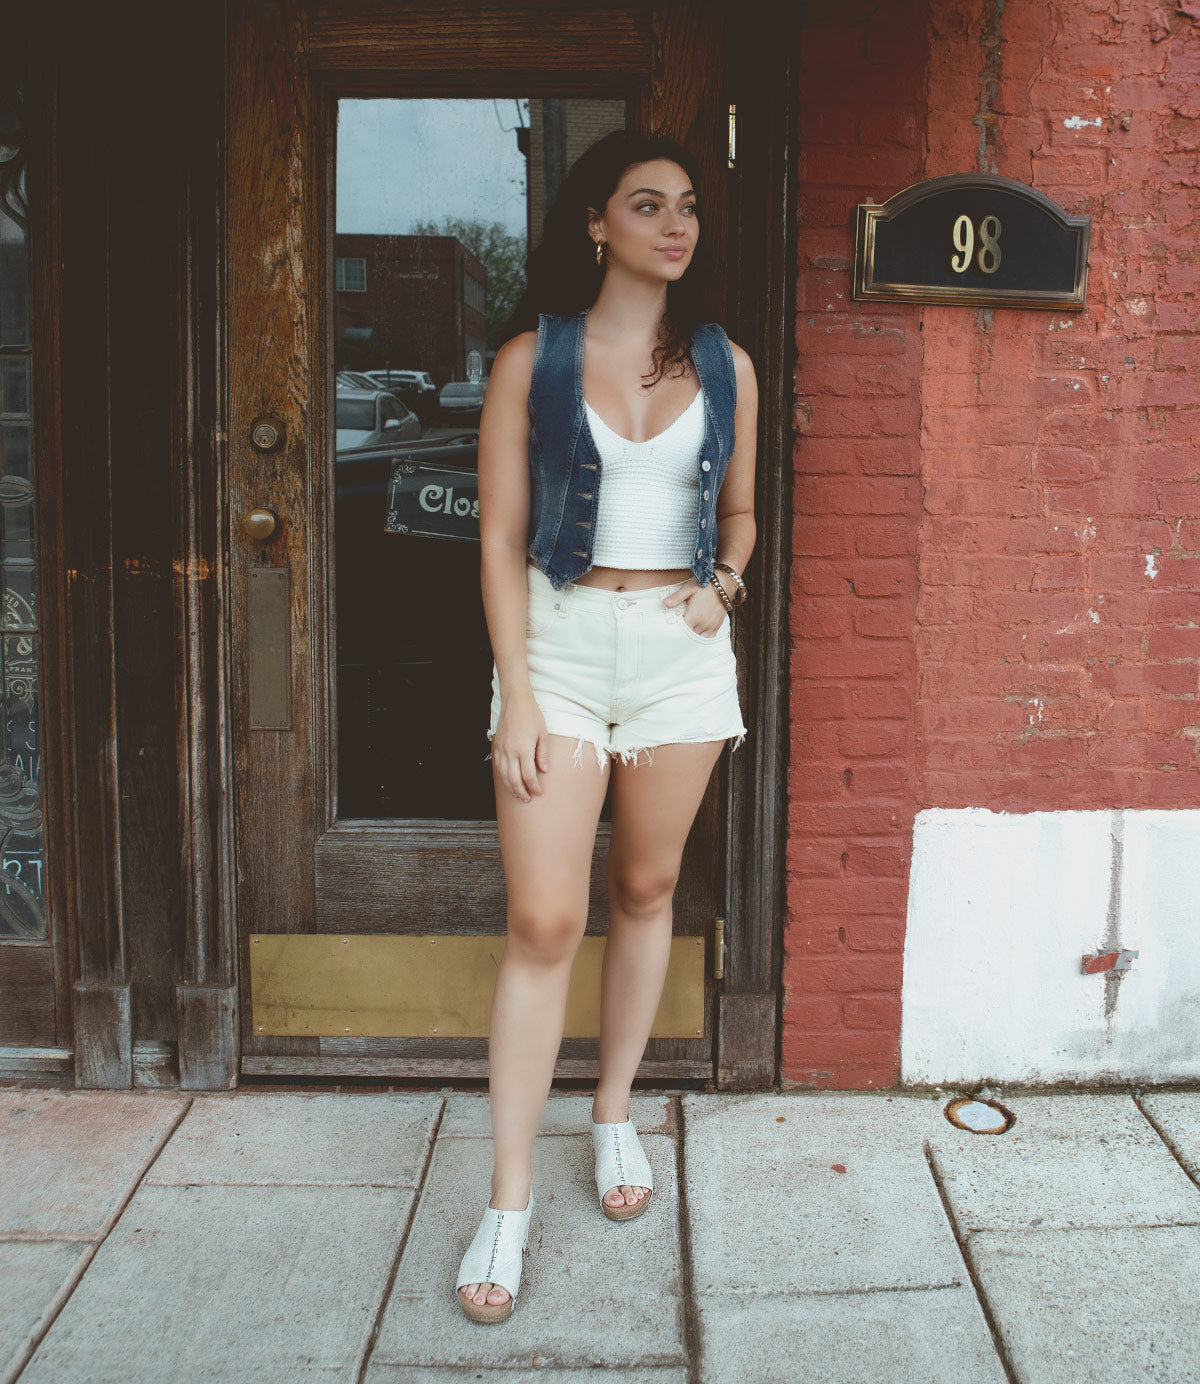 
                  
                    A woman in a denim vest and white shorts stands in front of an old wooden door, with the number 98 displayed on a red brick wall to her right, showcasing Roan Fortnight slip-on platform shoes.
                  
                